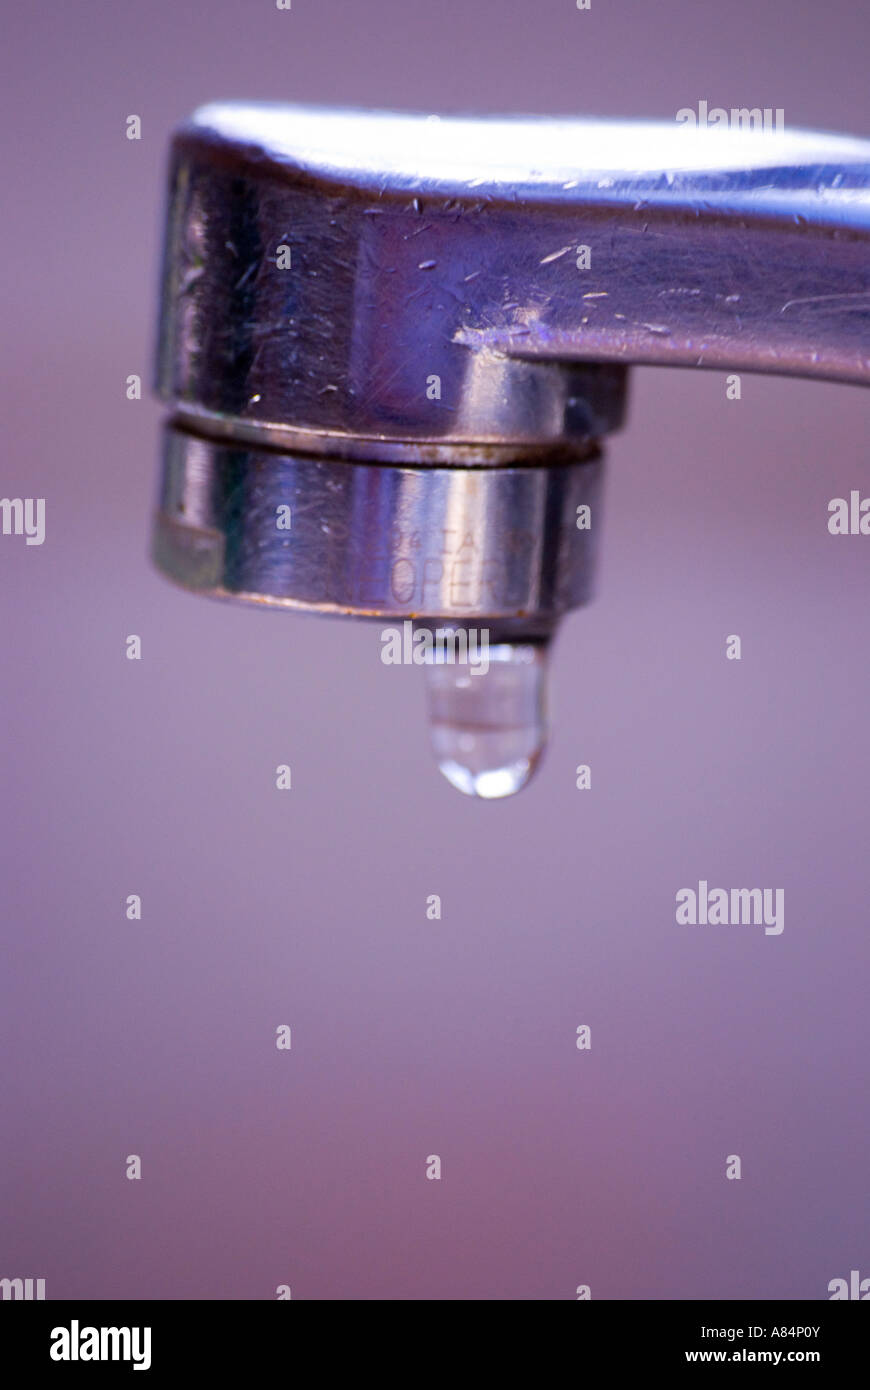 A dripping tap Stock Photo